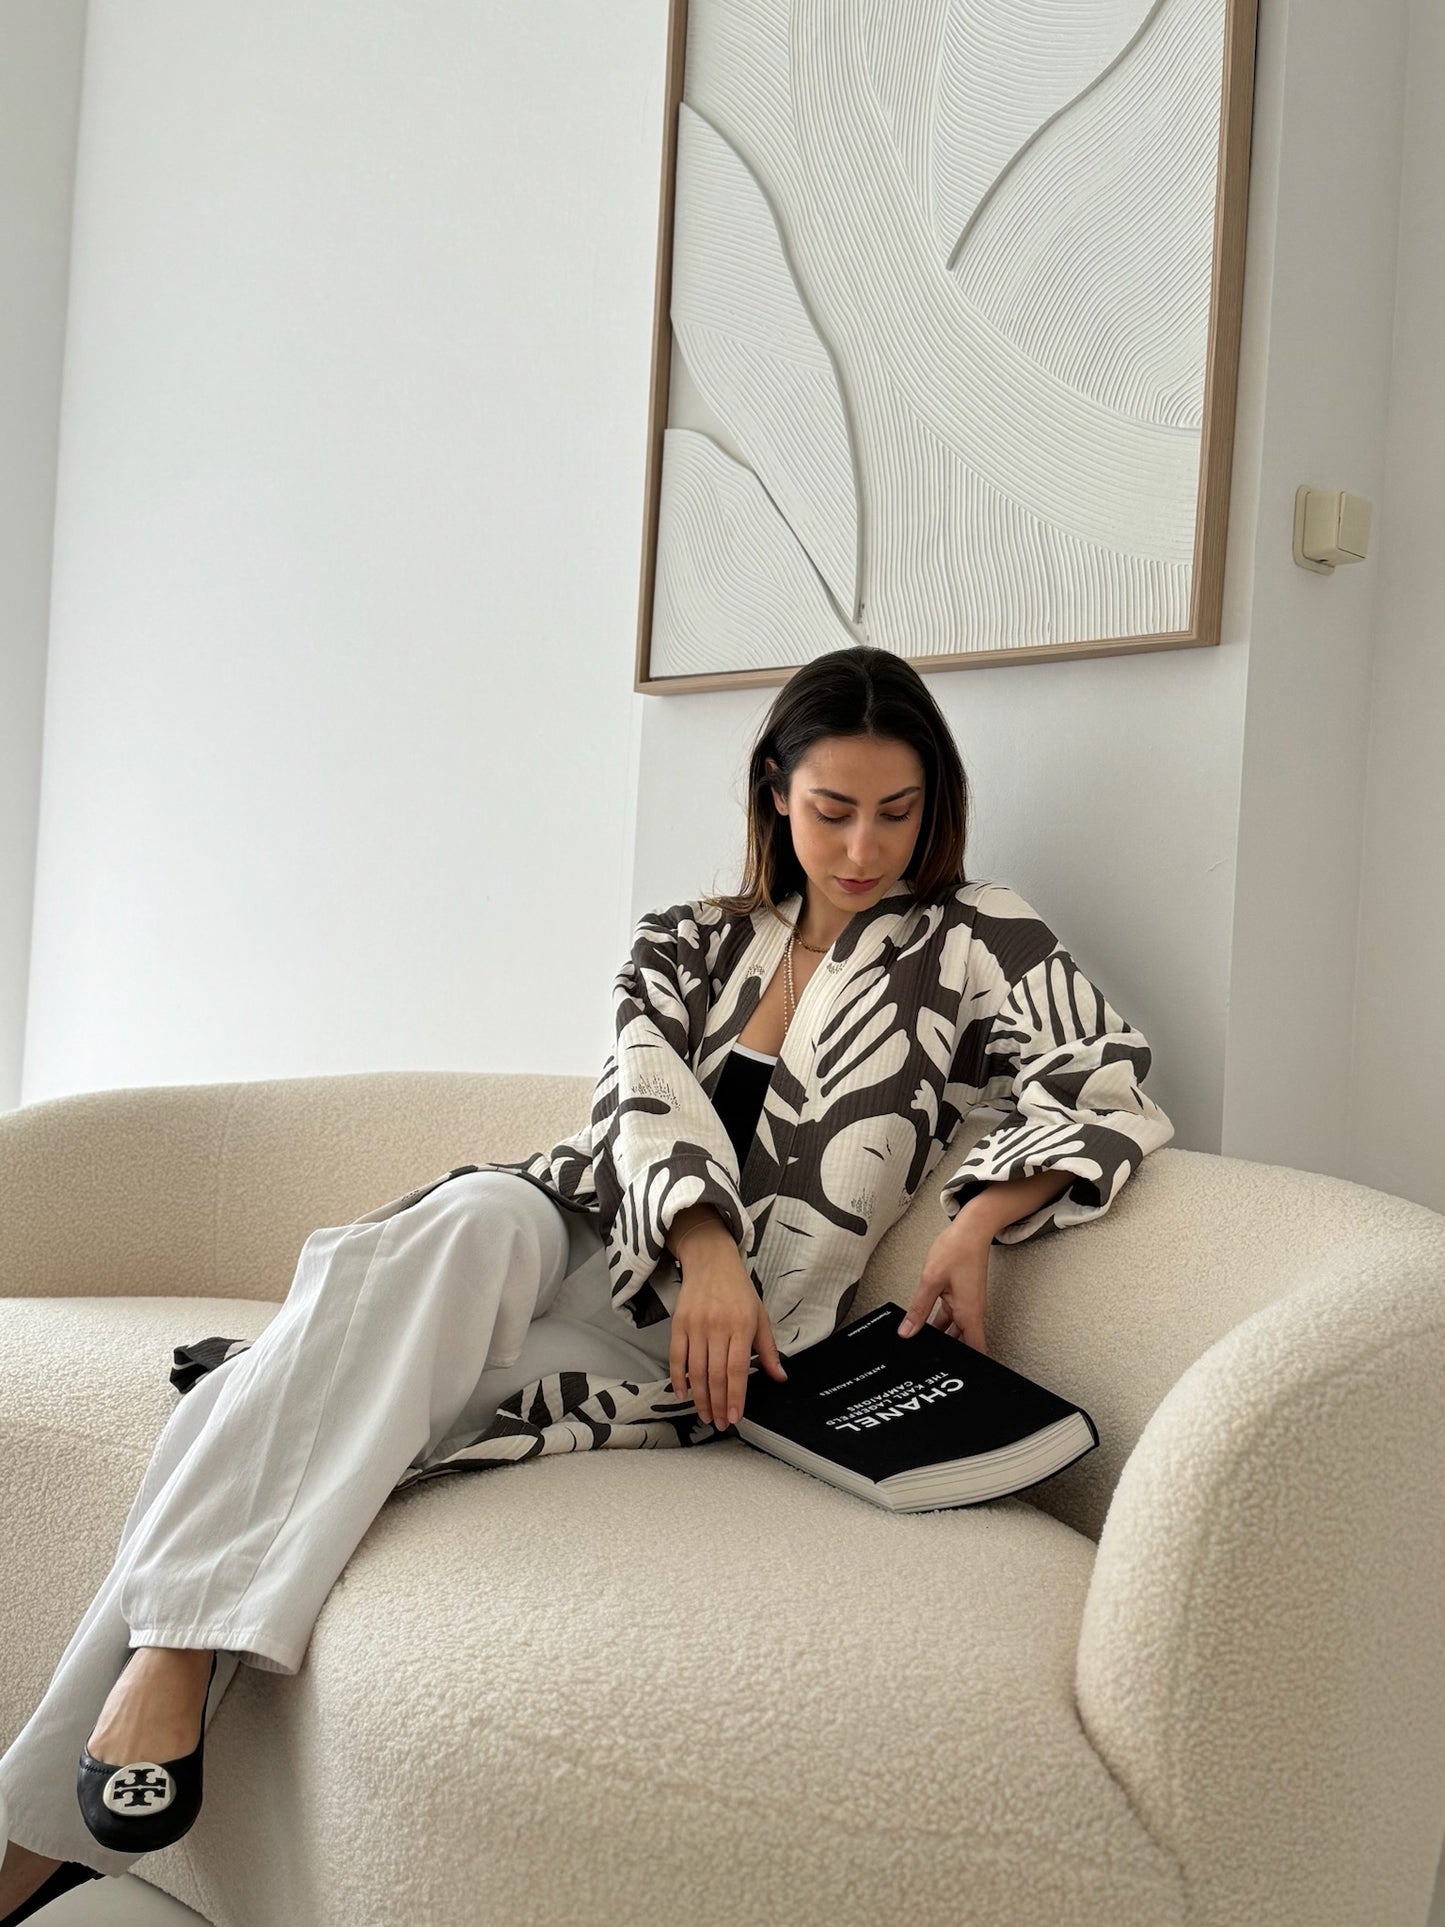 Black and white kimono - 100% cotton with contemporary pattern in faded black and offwhite tones, can be used as a bath or home robe or as a jacket